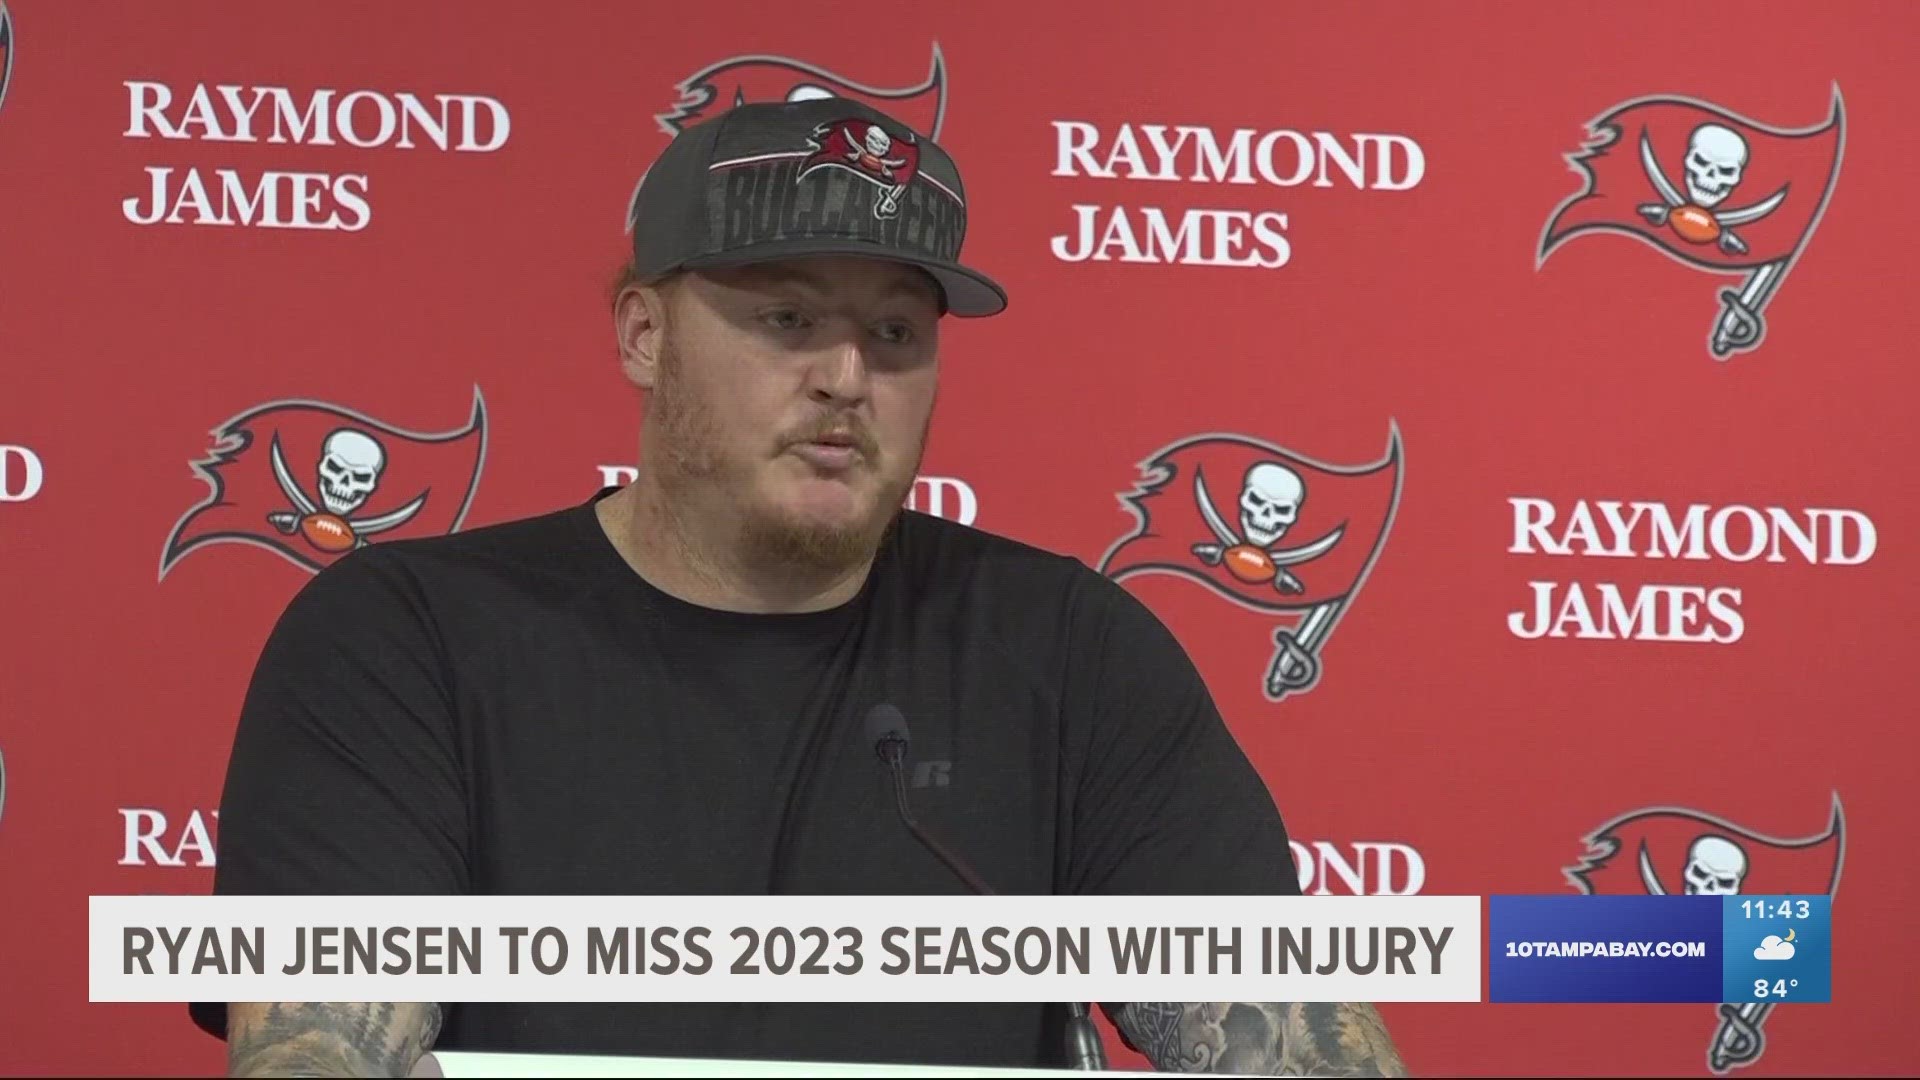 Bucs' Ryan Jensen to be placed on Injured Reserve, team confirms